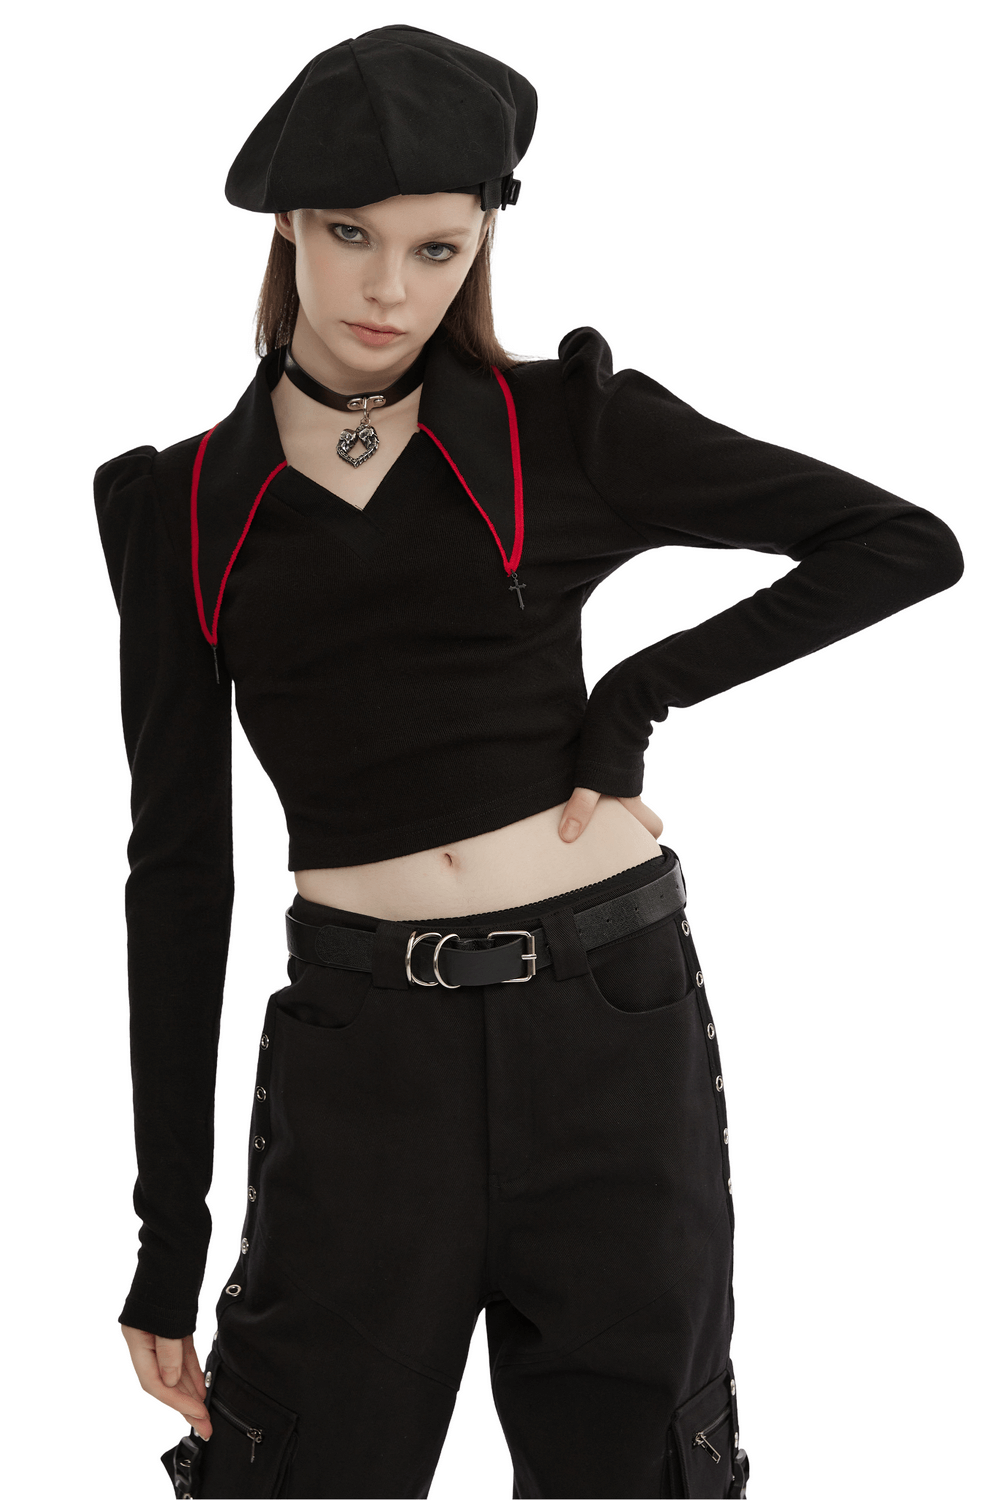 Women's Black V-Neck Long Sleeves Top with Red Trim